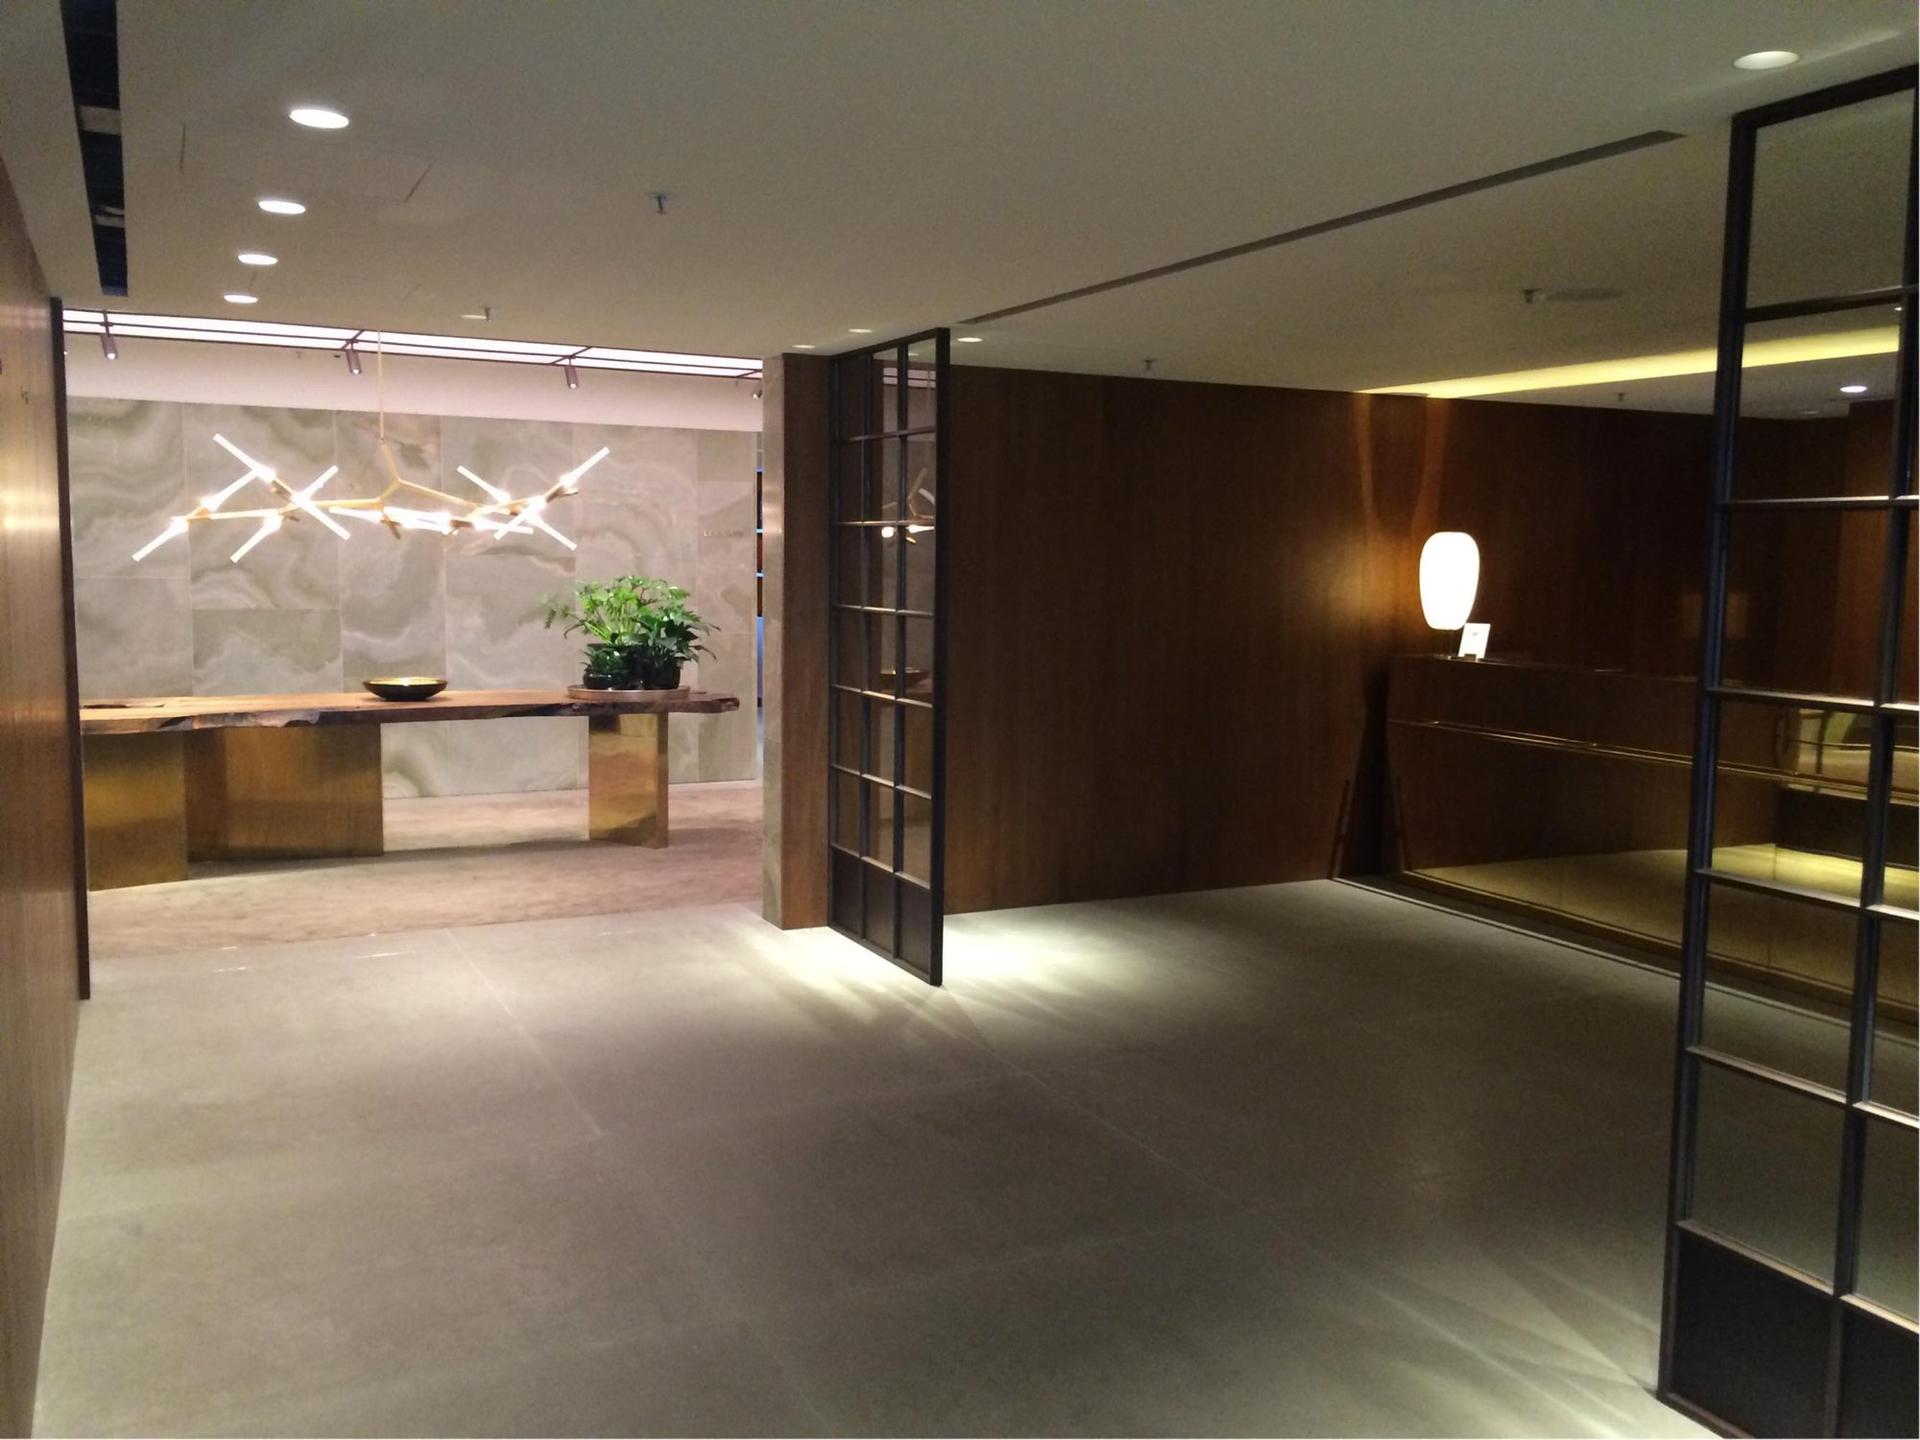 Cathay Pacific The Pier First Class Lounge image 18 of 100